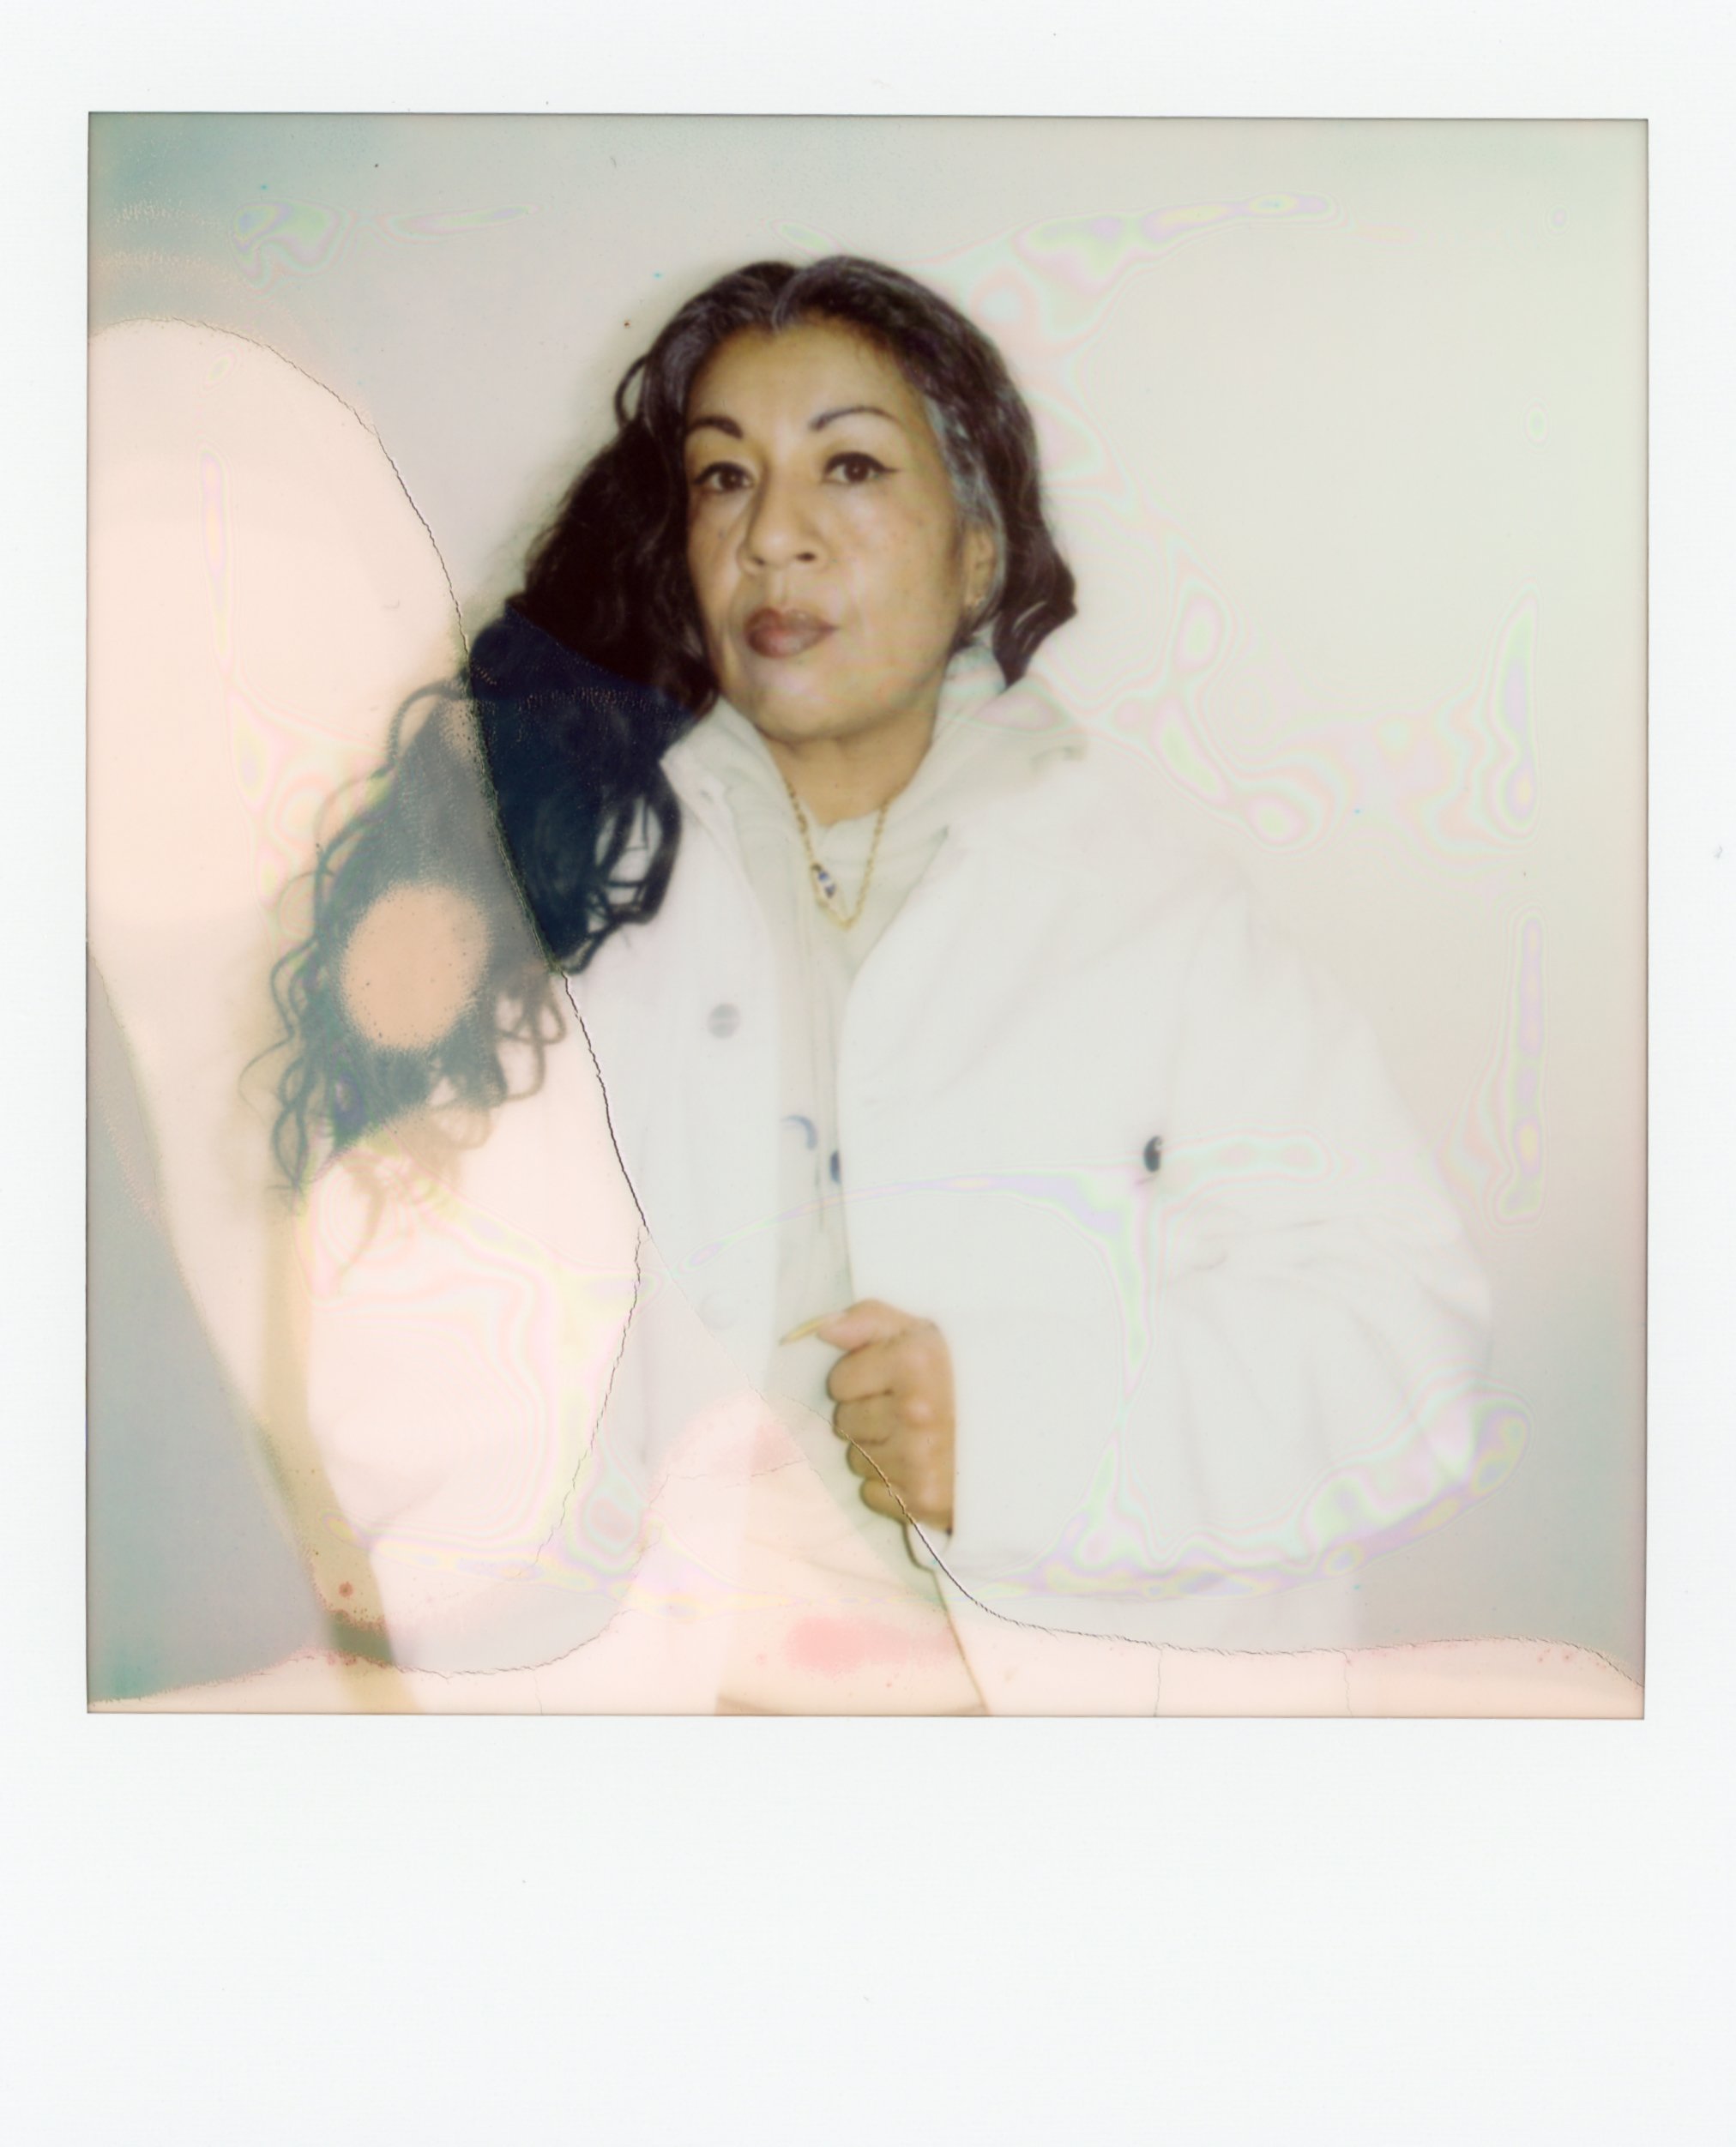 Jessica - L2 - Carhartt WIP Submission R1 Final Selects4.jpeg